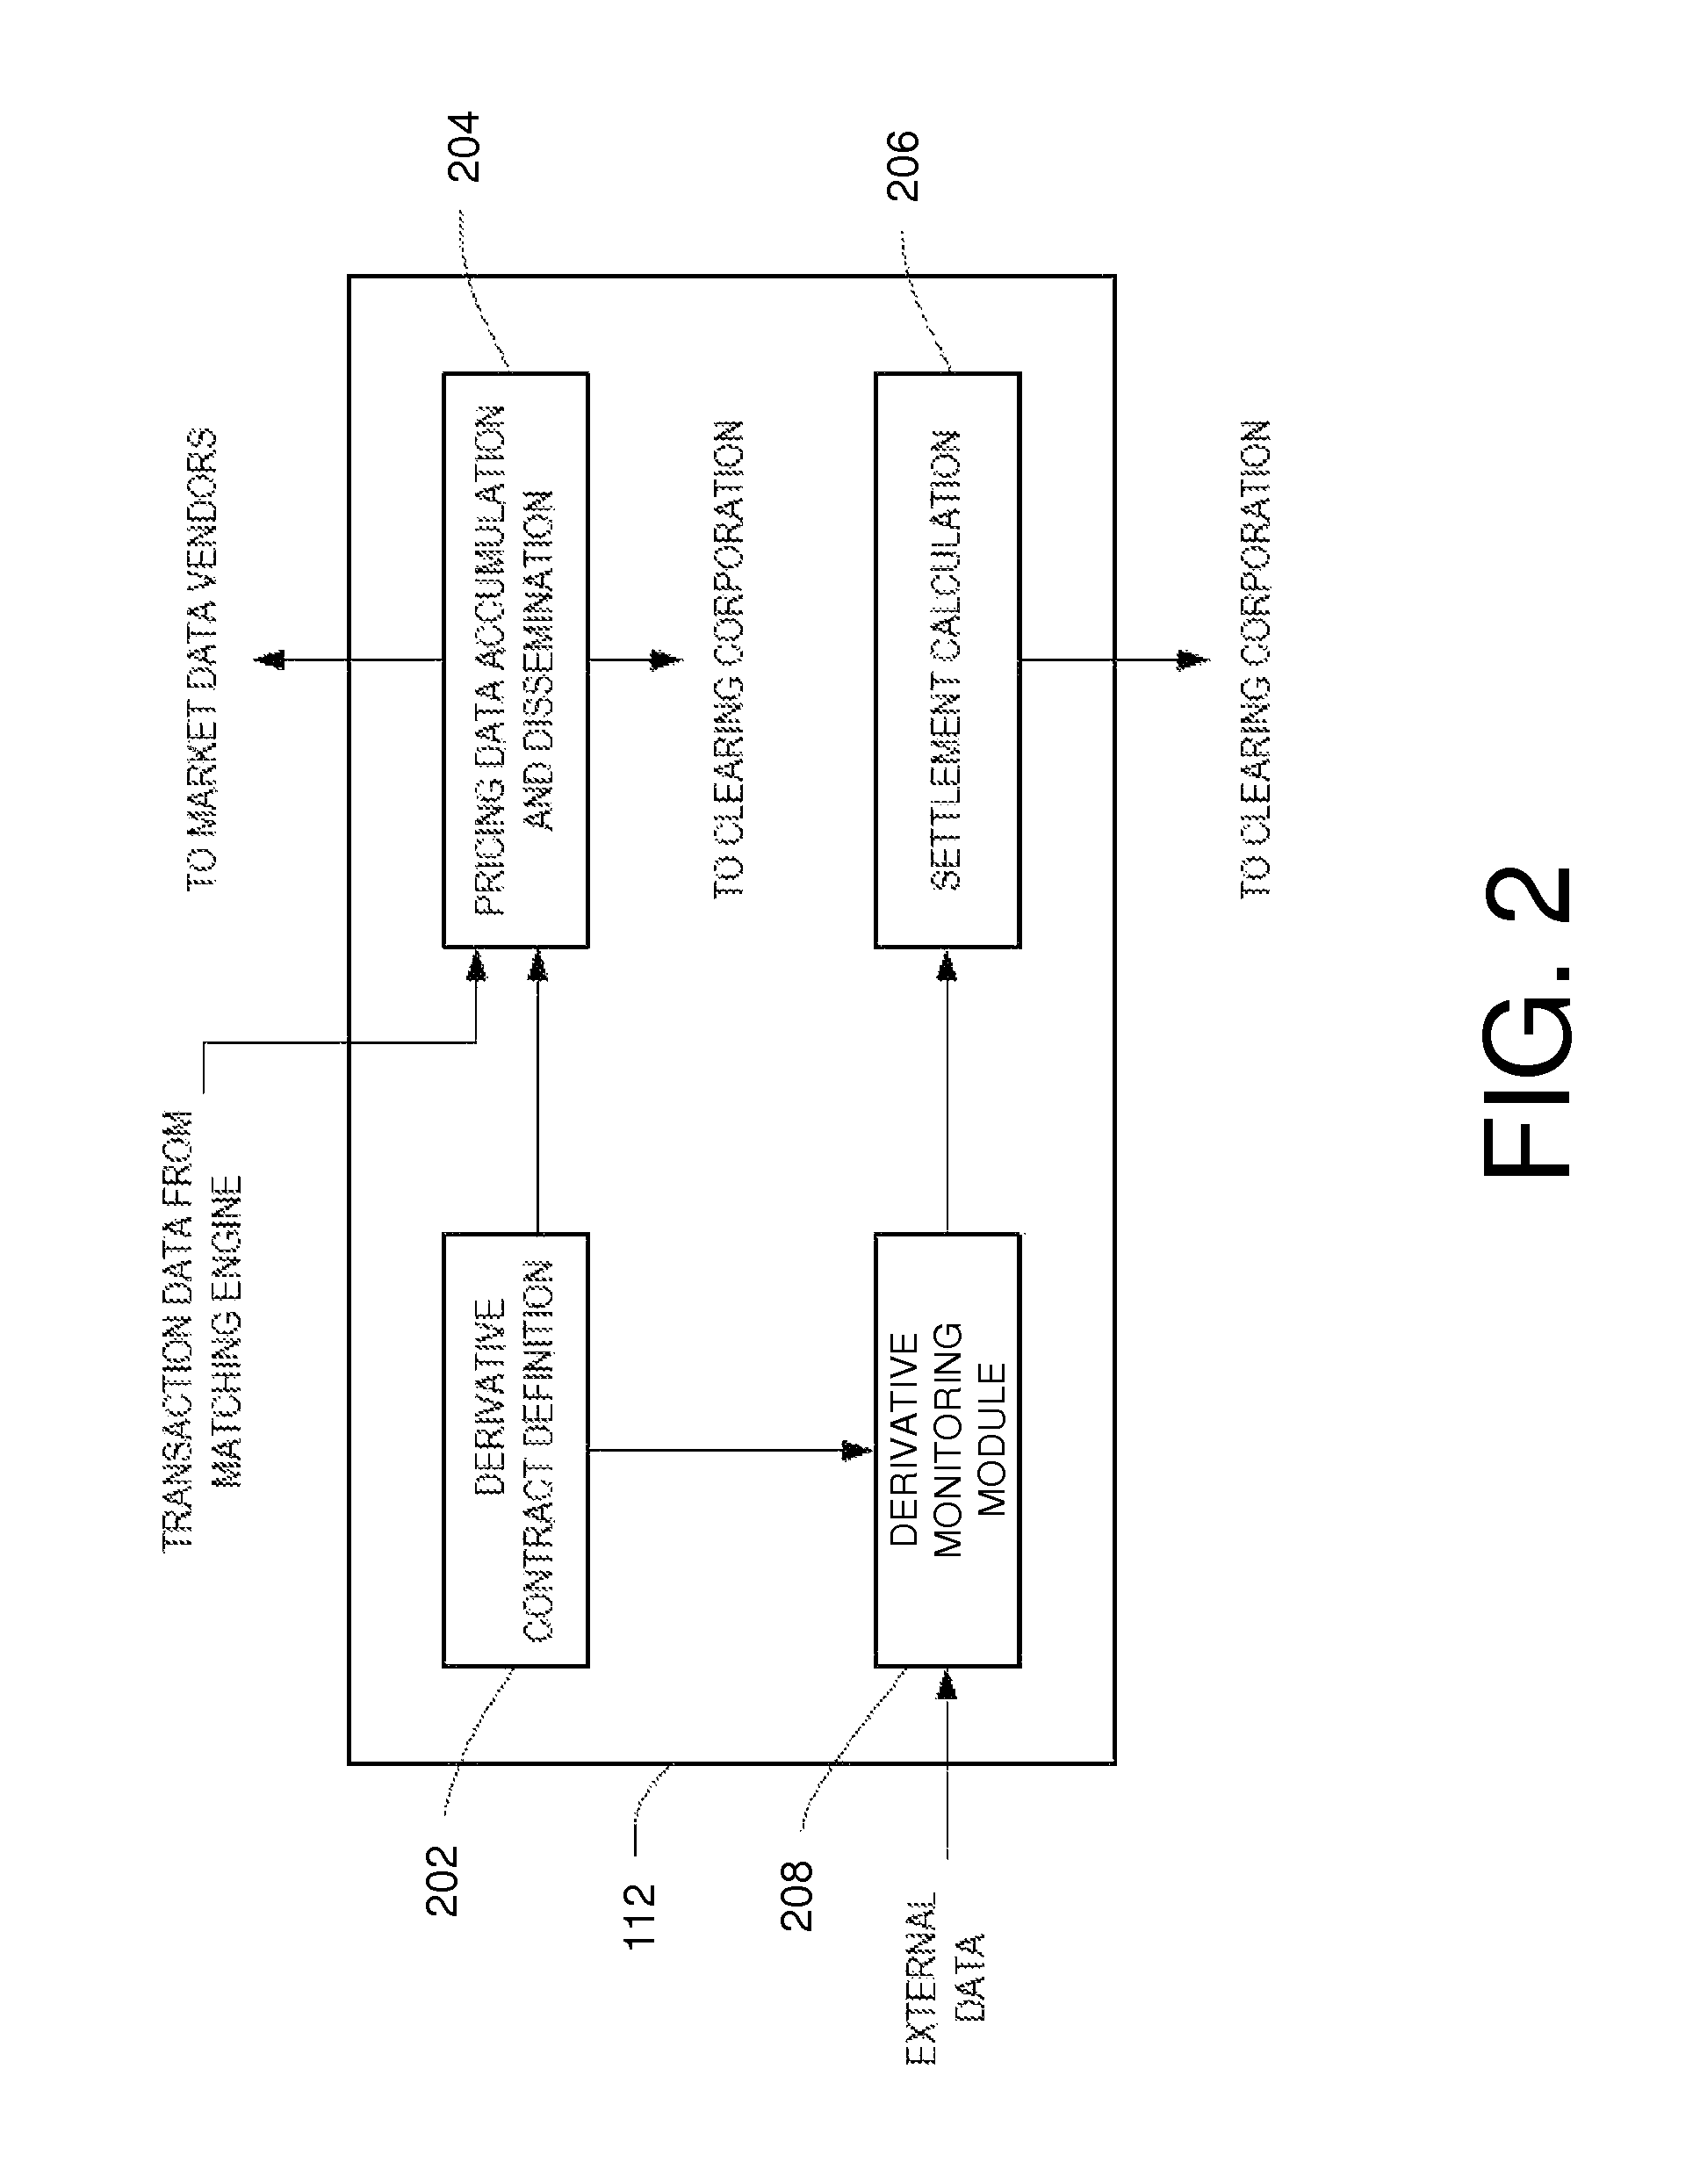 Methods and systems for creating an interest rate swap volatility index and trading derivative products based thereon